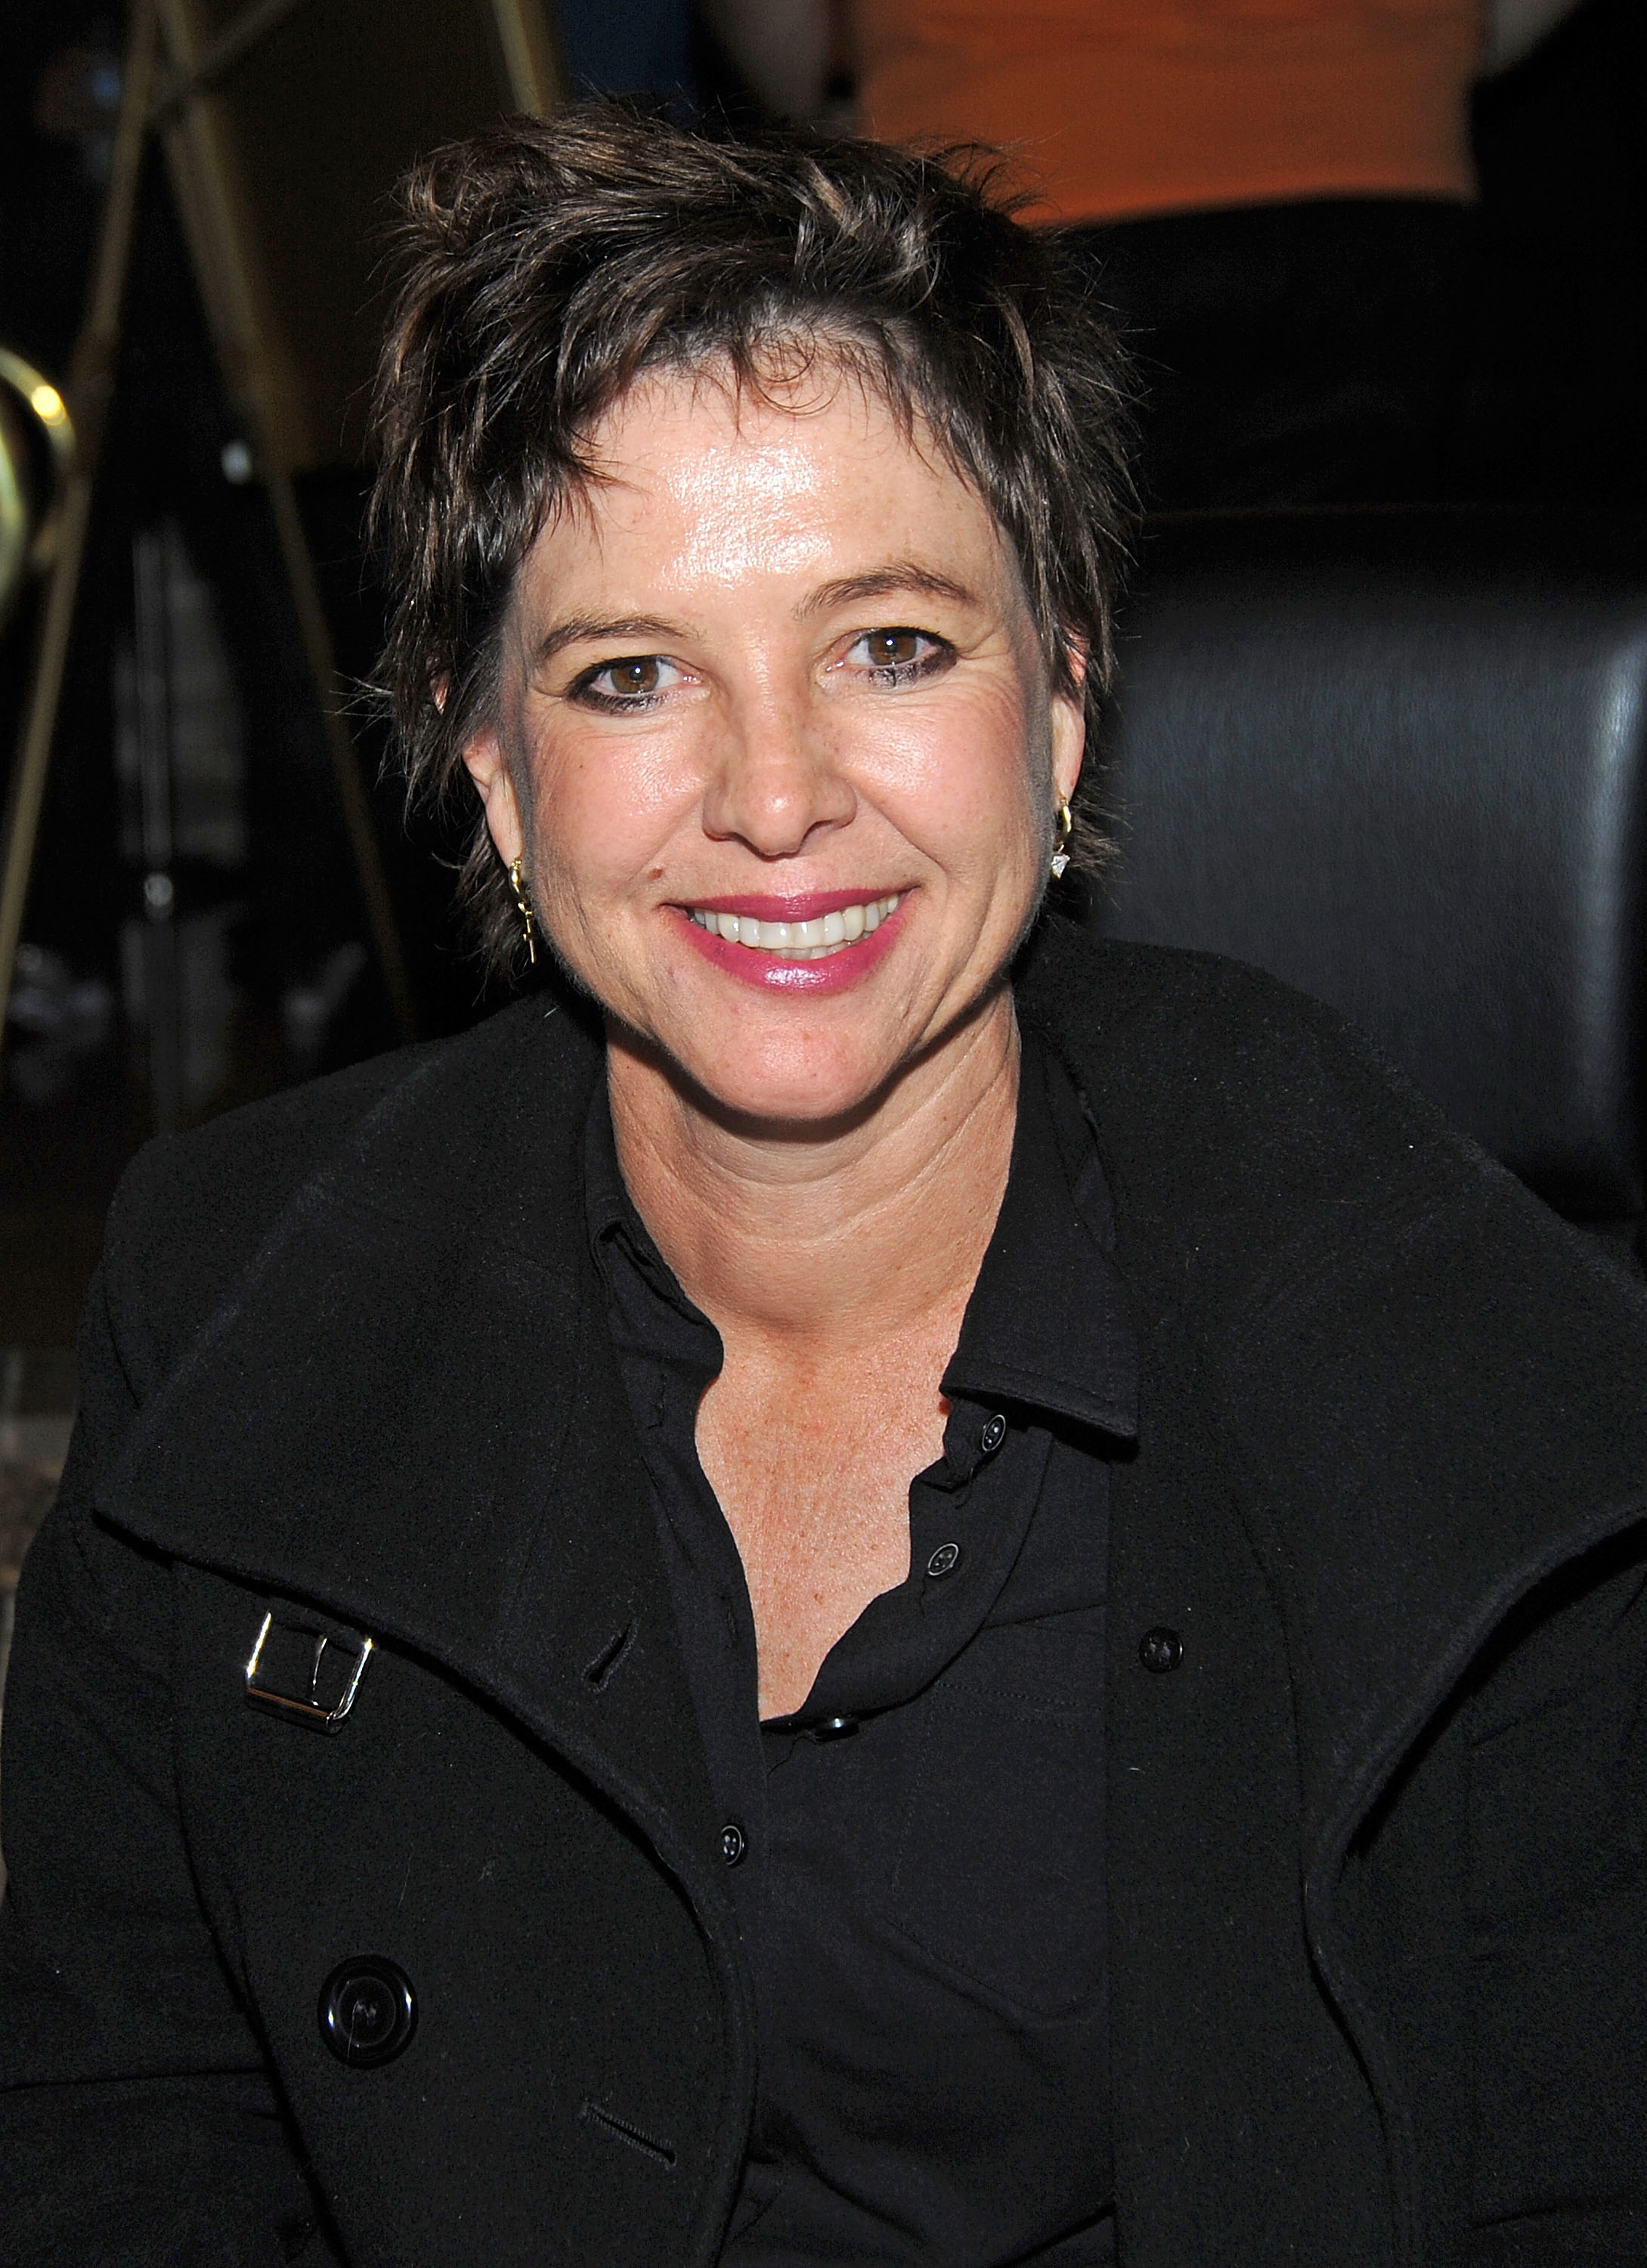 Kristy McNichol attends Day 1 of the 2010 Chiller Theatre Expo at Hilton on October 29, 2010, in Parsippany, New Jersey | Source: New Jersey